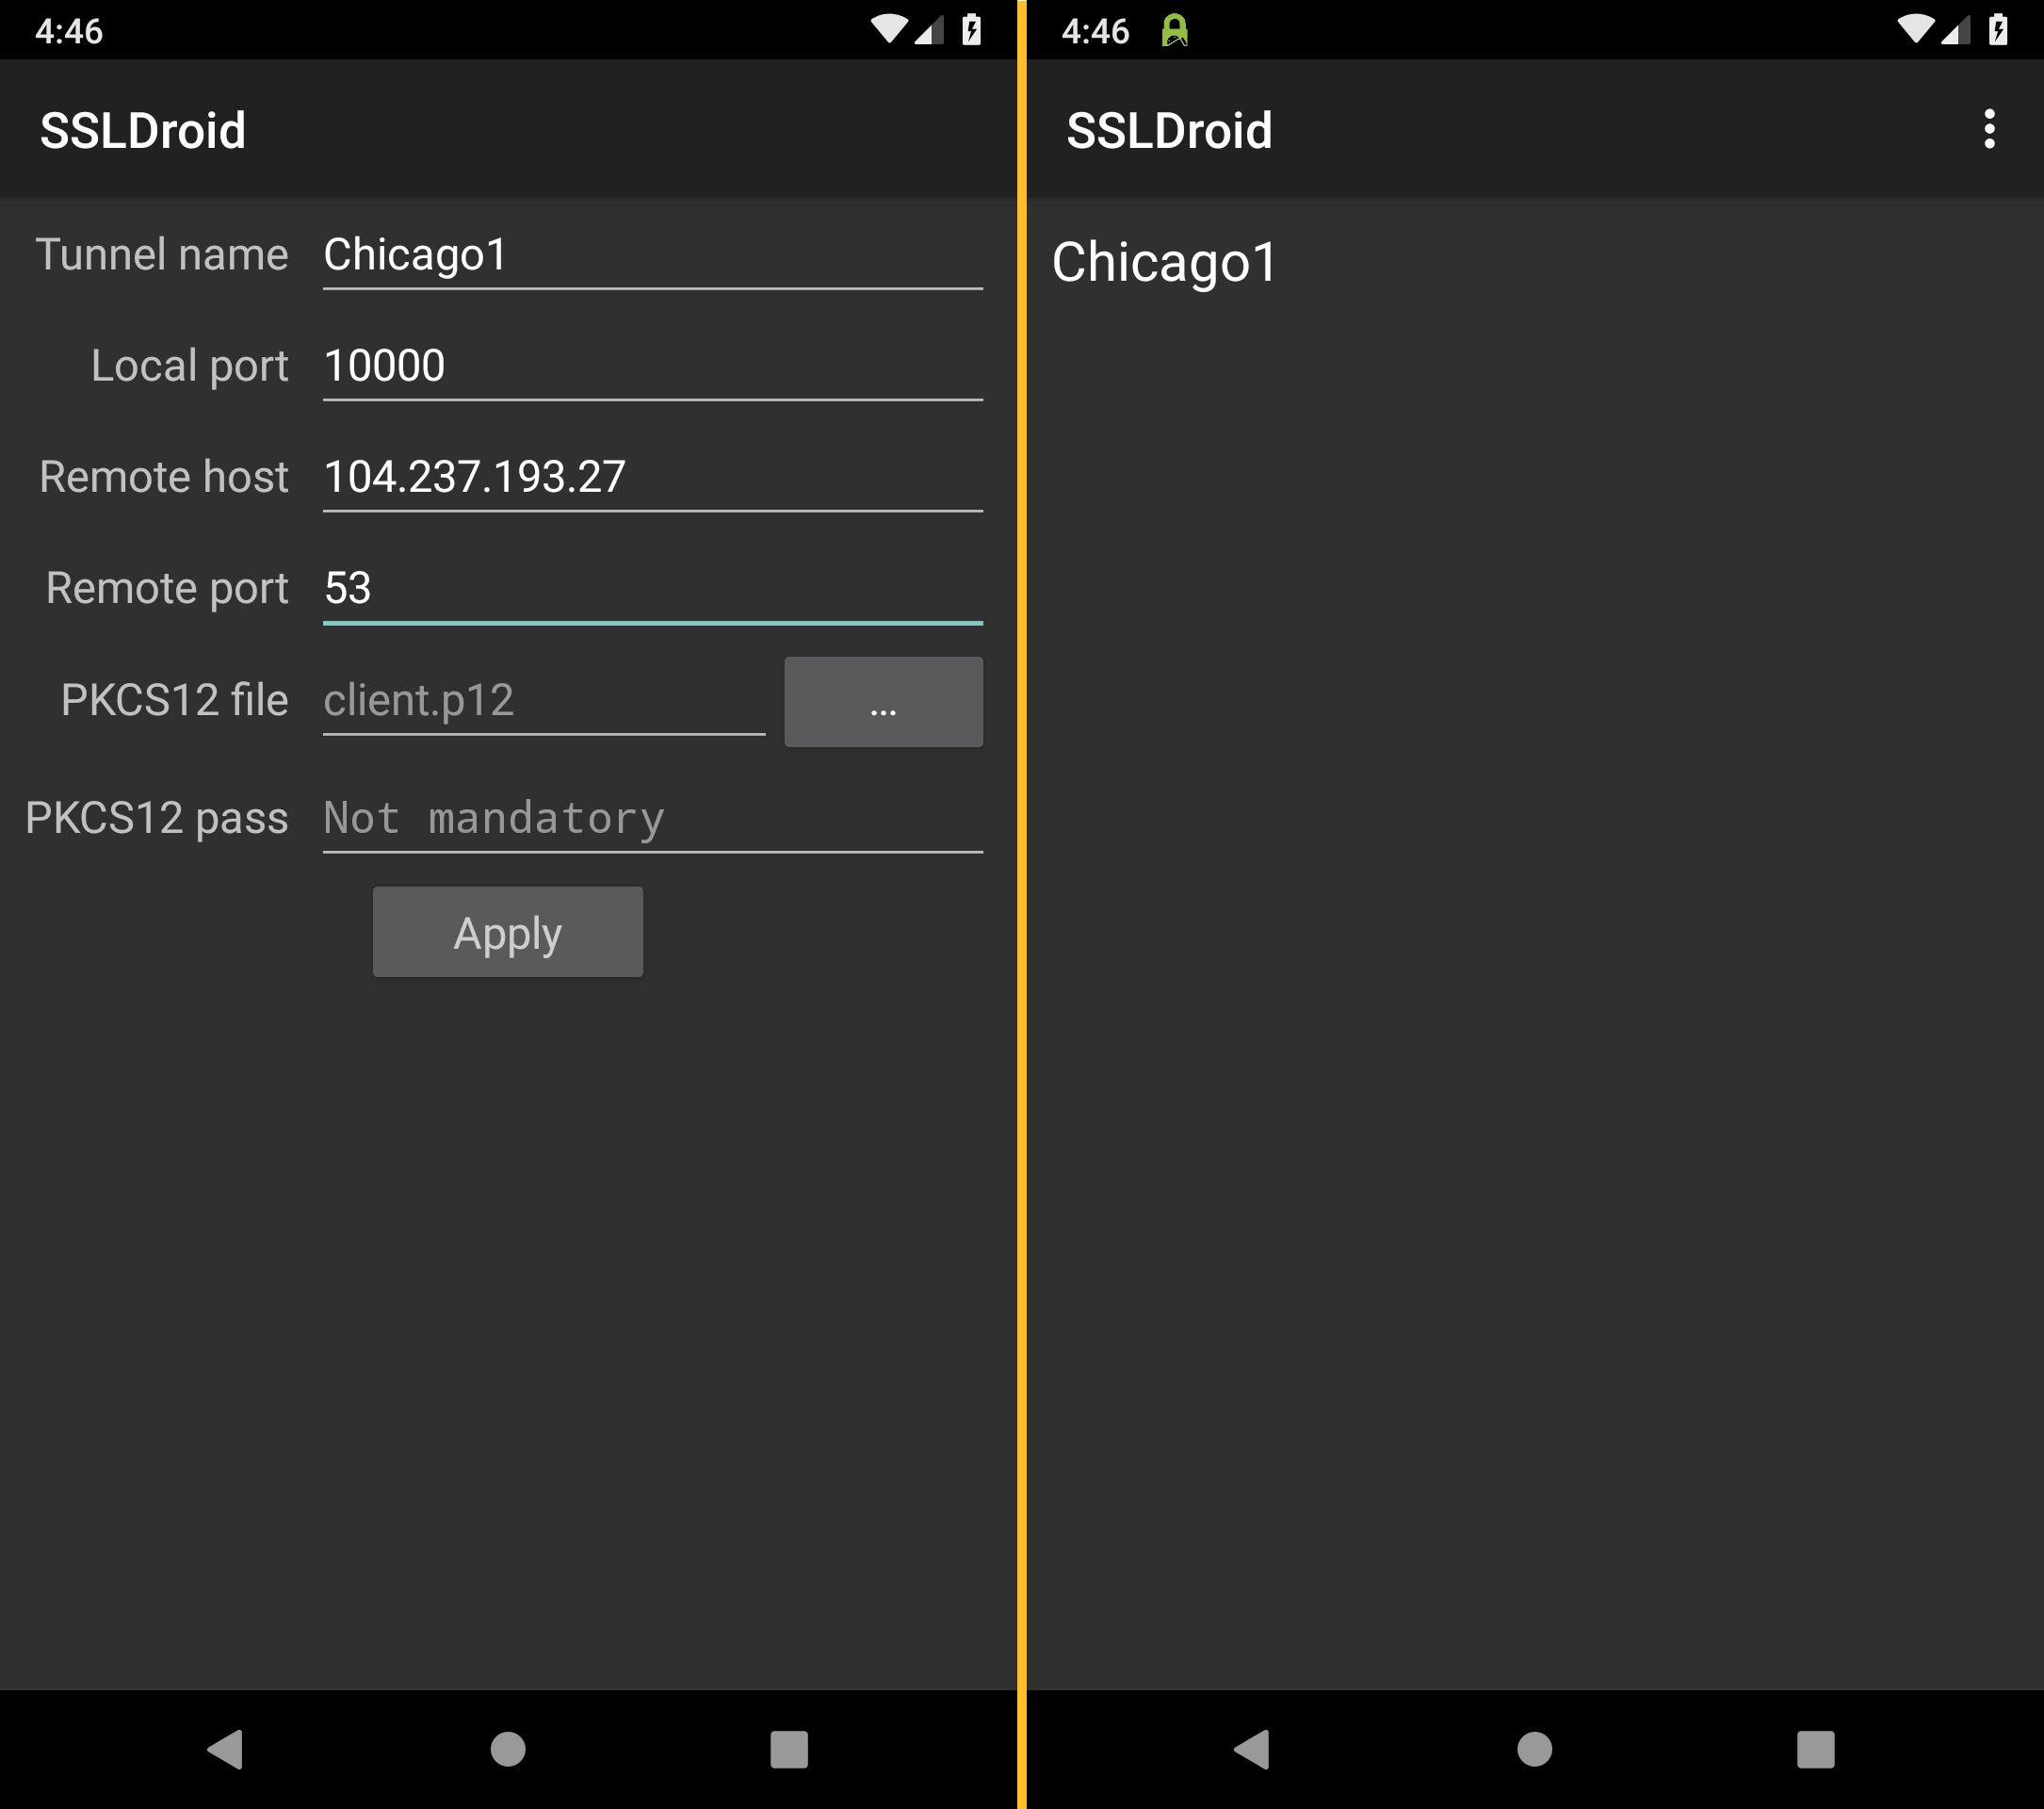 Stealth VPN on Android: Add an SSL connection to SSLDroid | OpenVPN through SSLDroid tunnel (Stealth VPN)